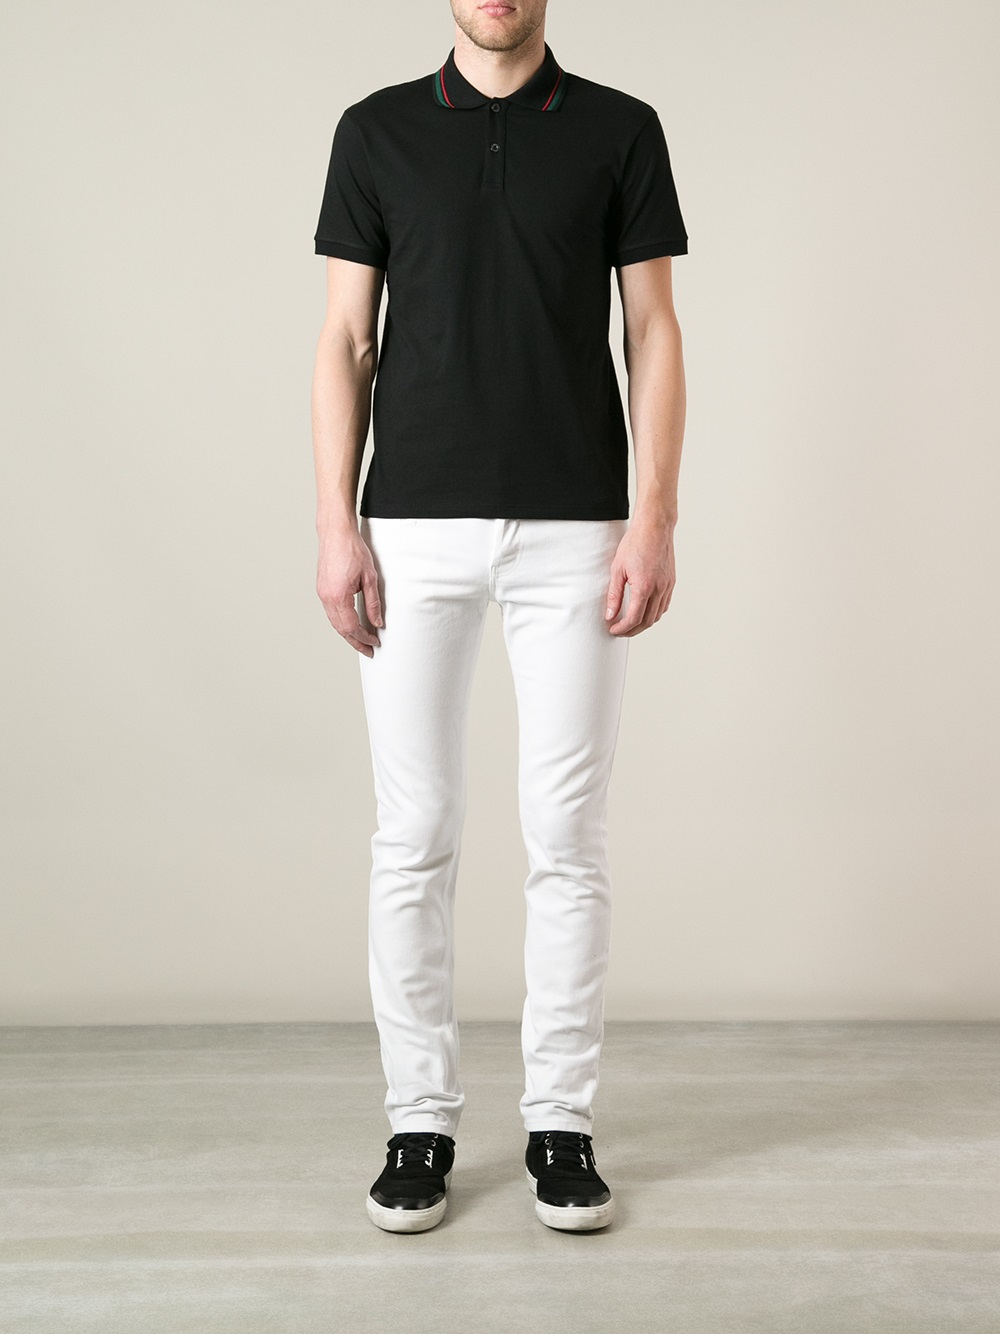 Lyst - Gucci Classic Polo Shirt in Black for Men